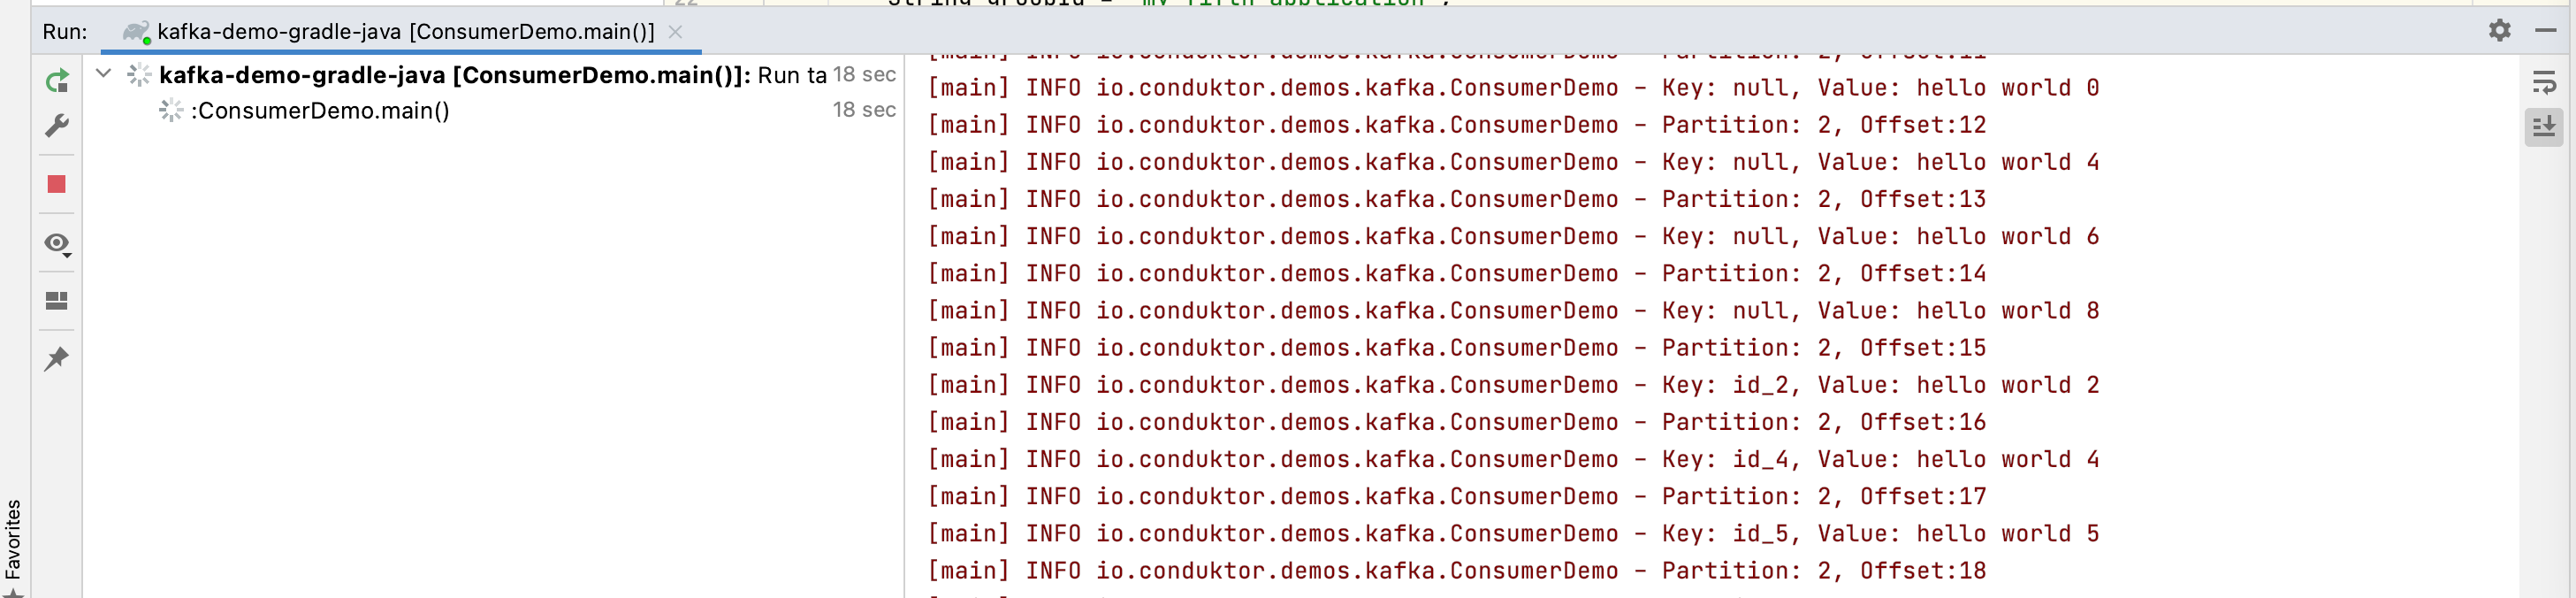 Screenshot showing all messages from the topic when the Kafka Consumer Java Application is restarted with a new Kafka Consumer Group ID